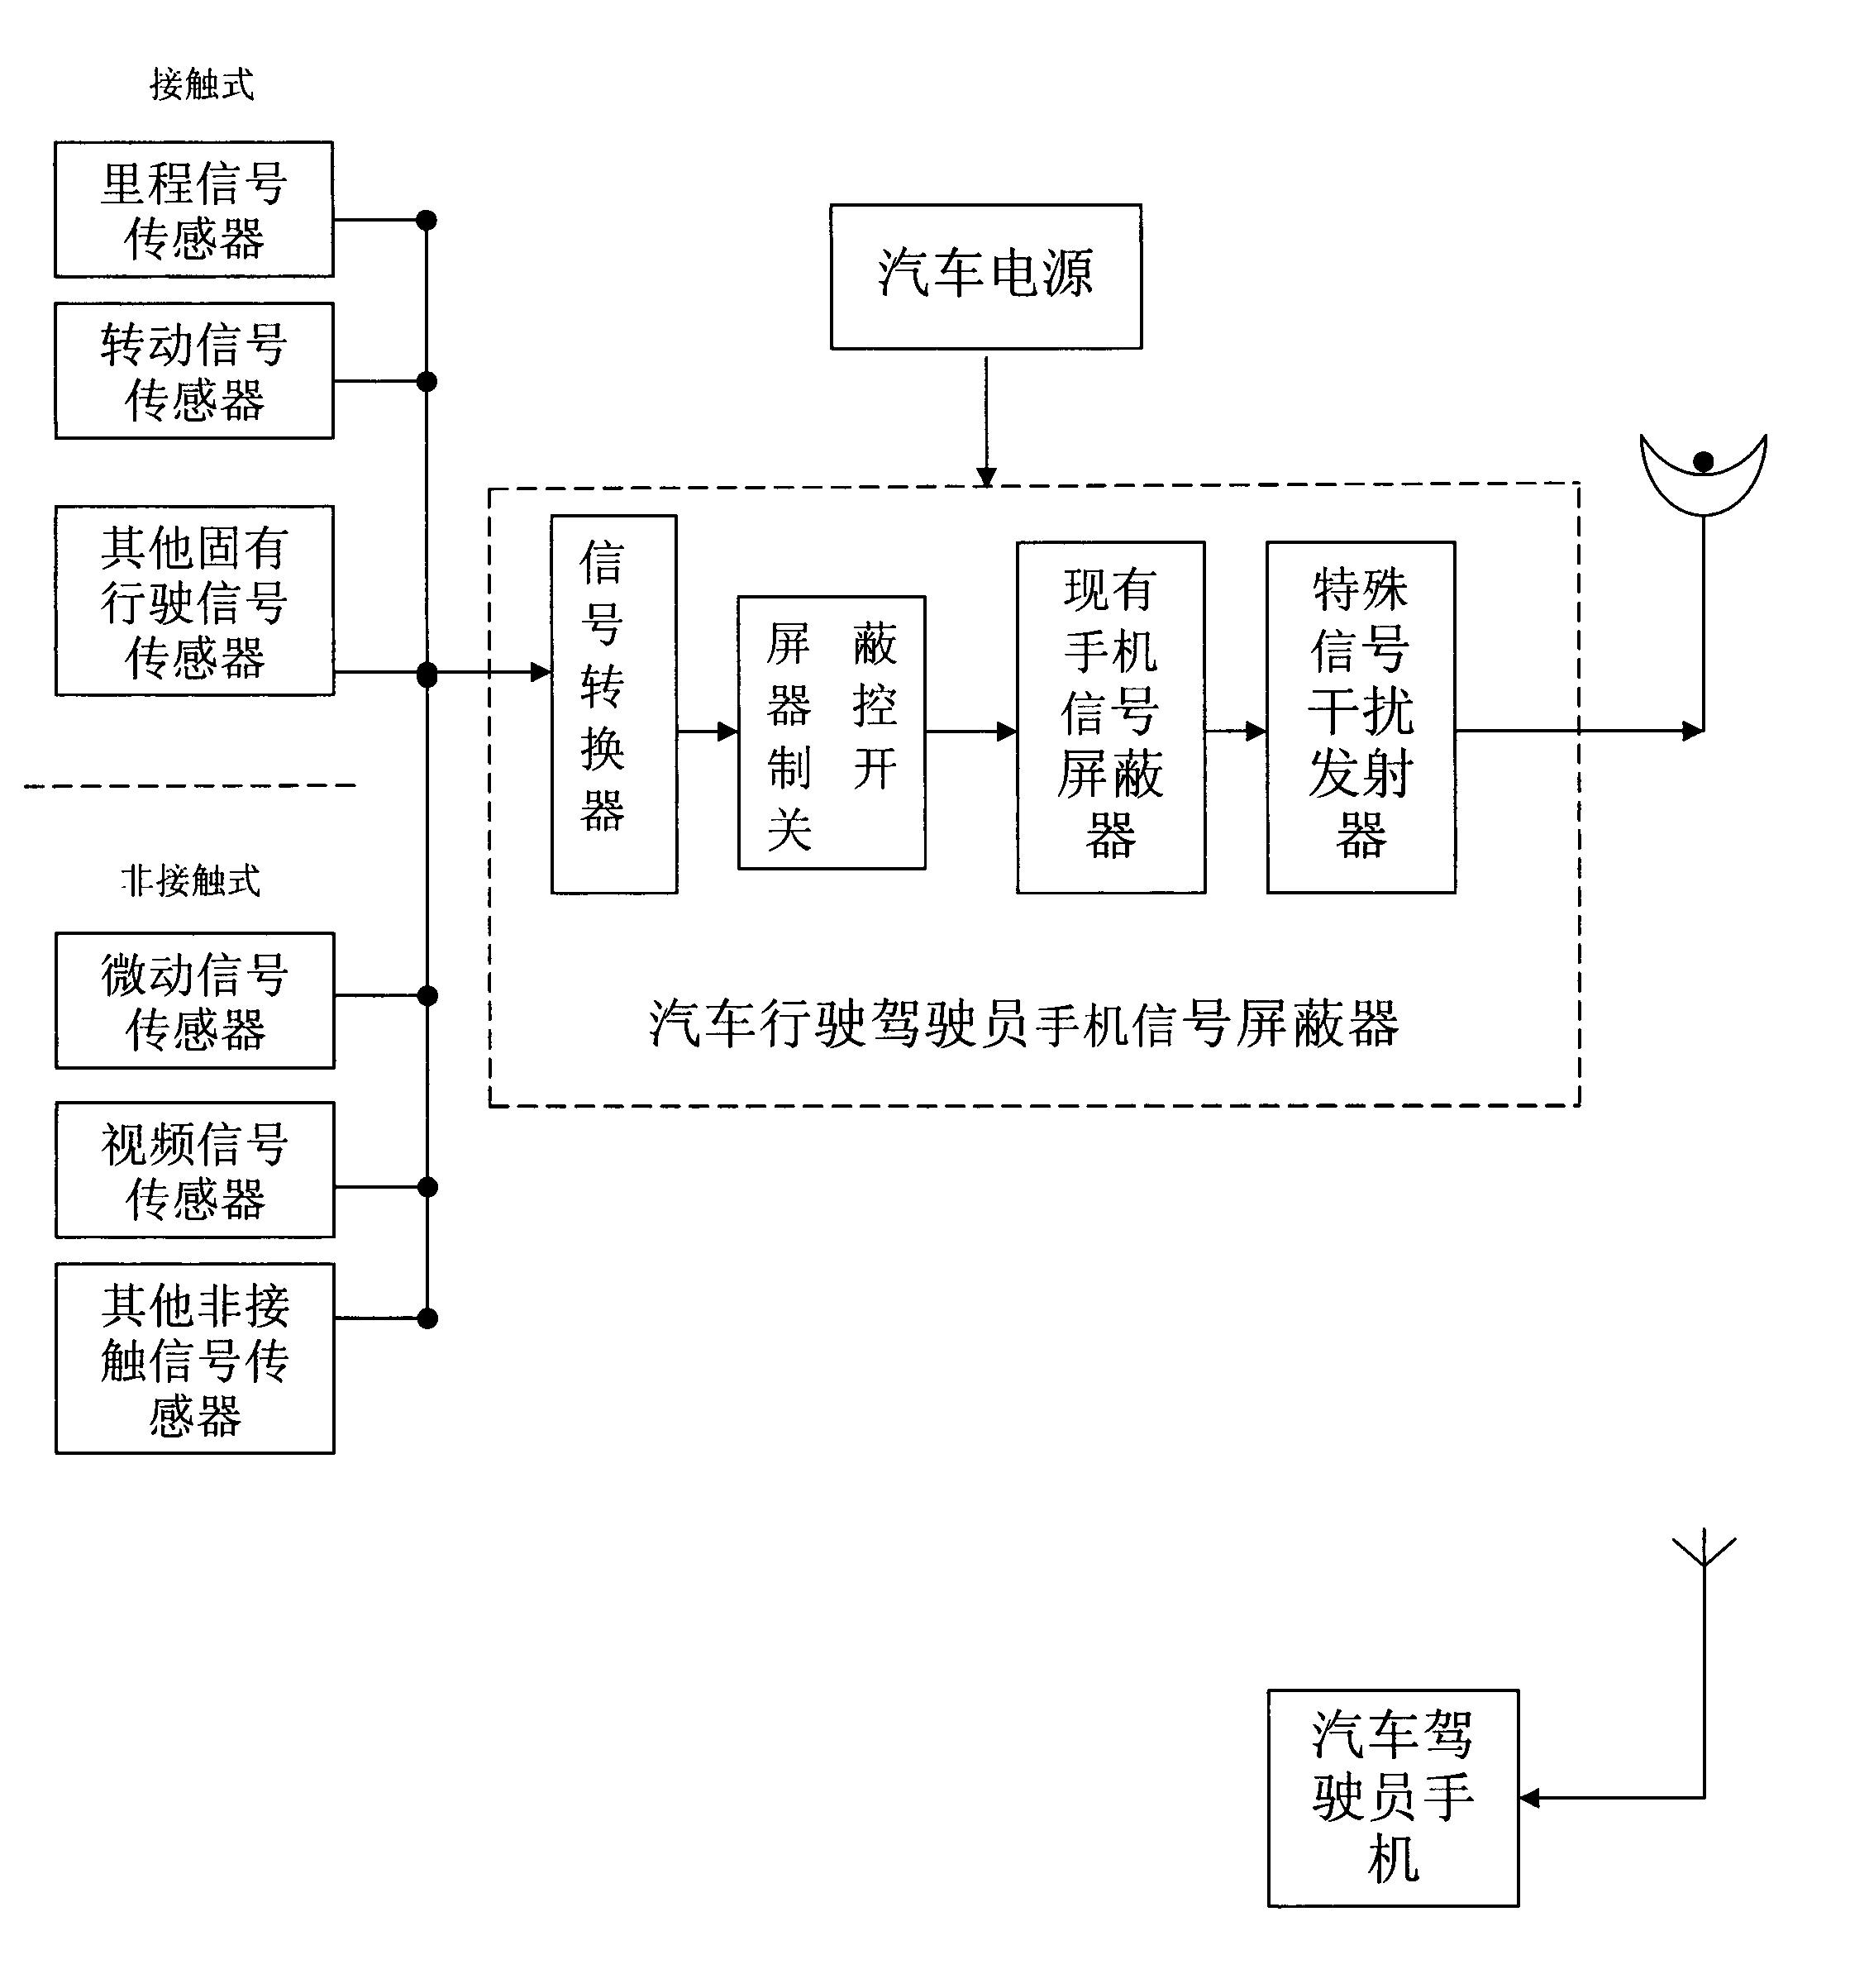 Mobile phone signal shielding device for automobile driver